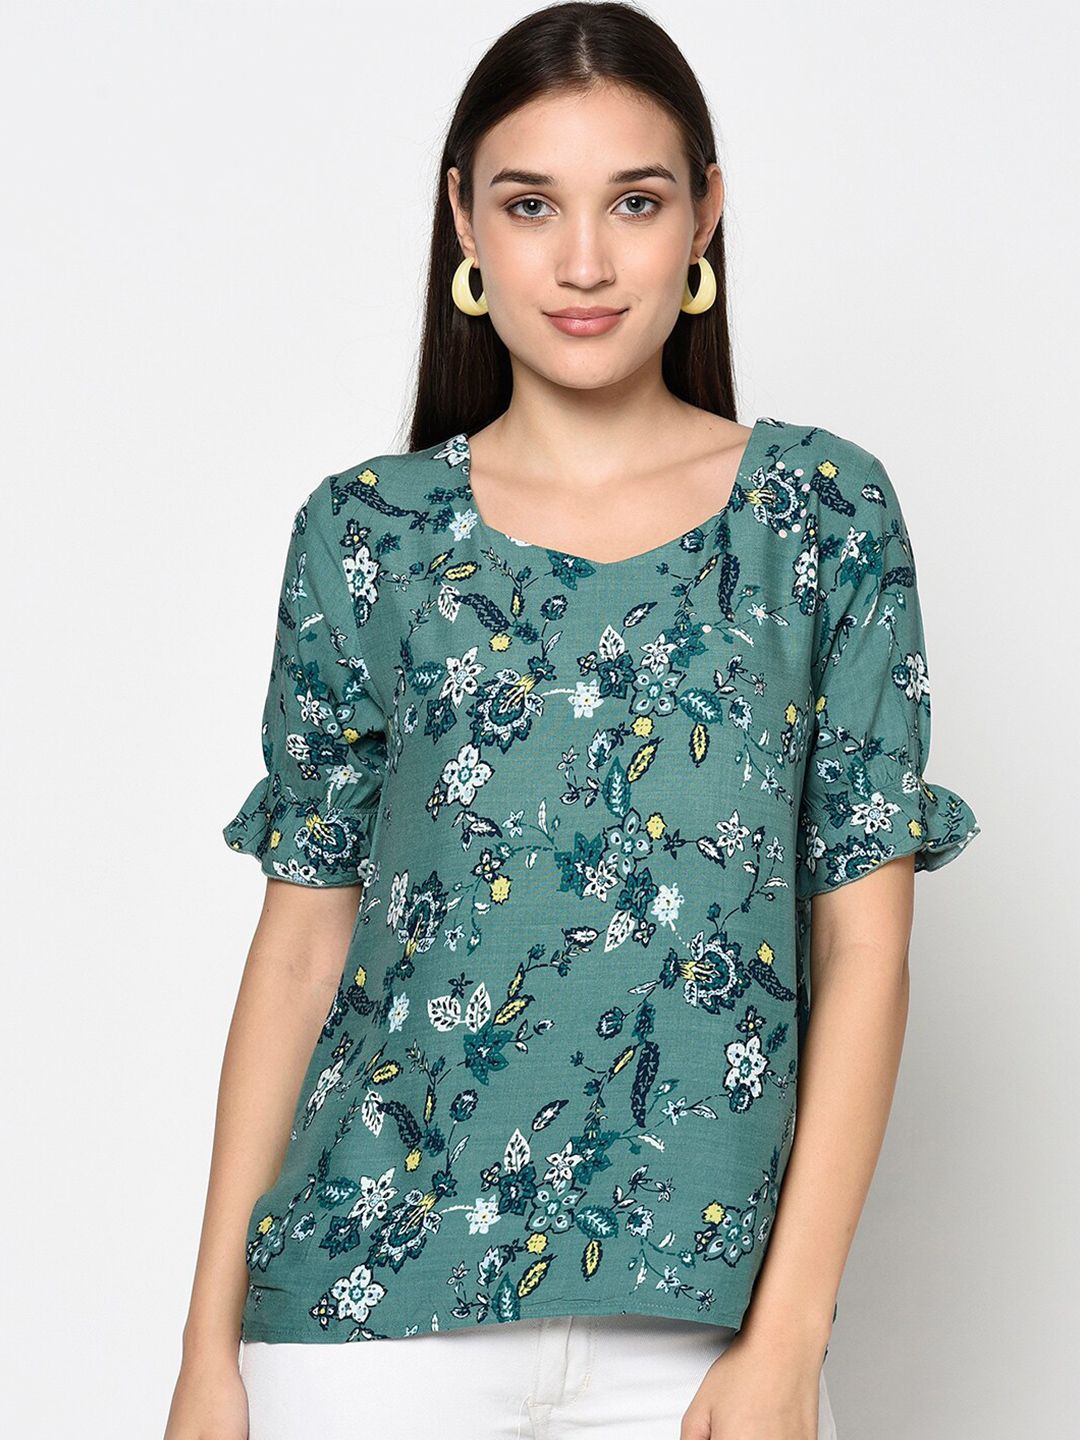 Miss Grace Floral Printed Puff Sleeves Top Price in India